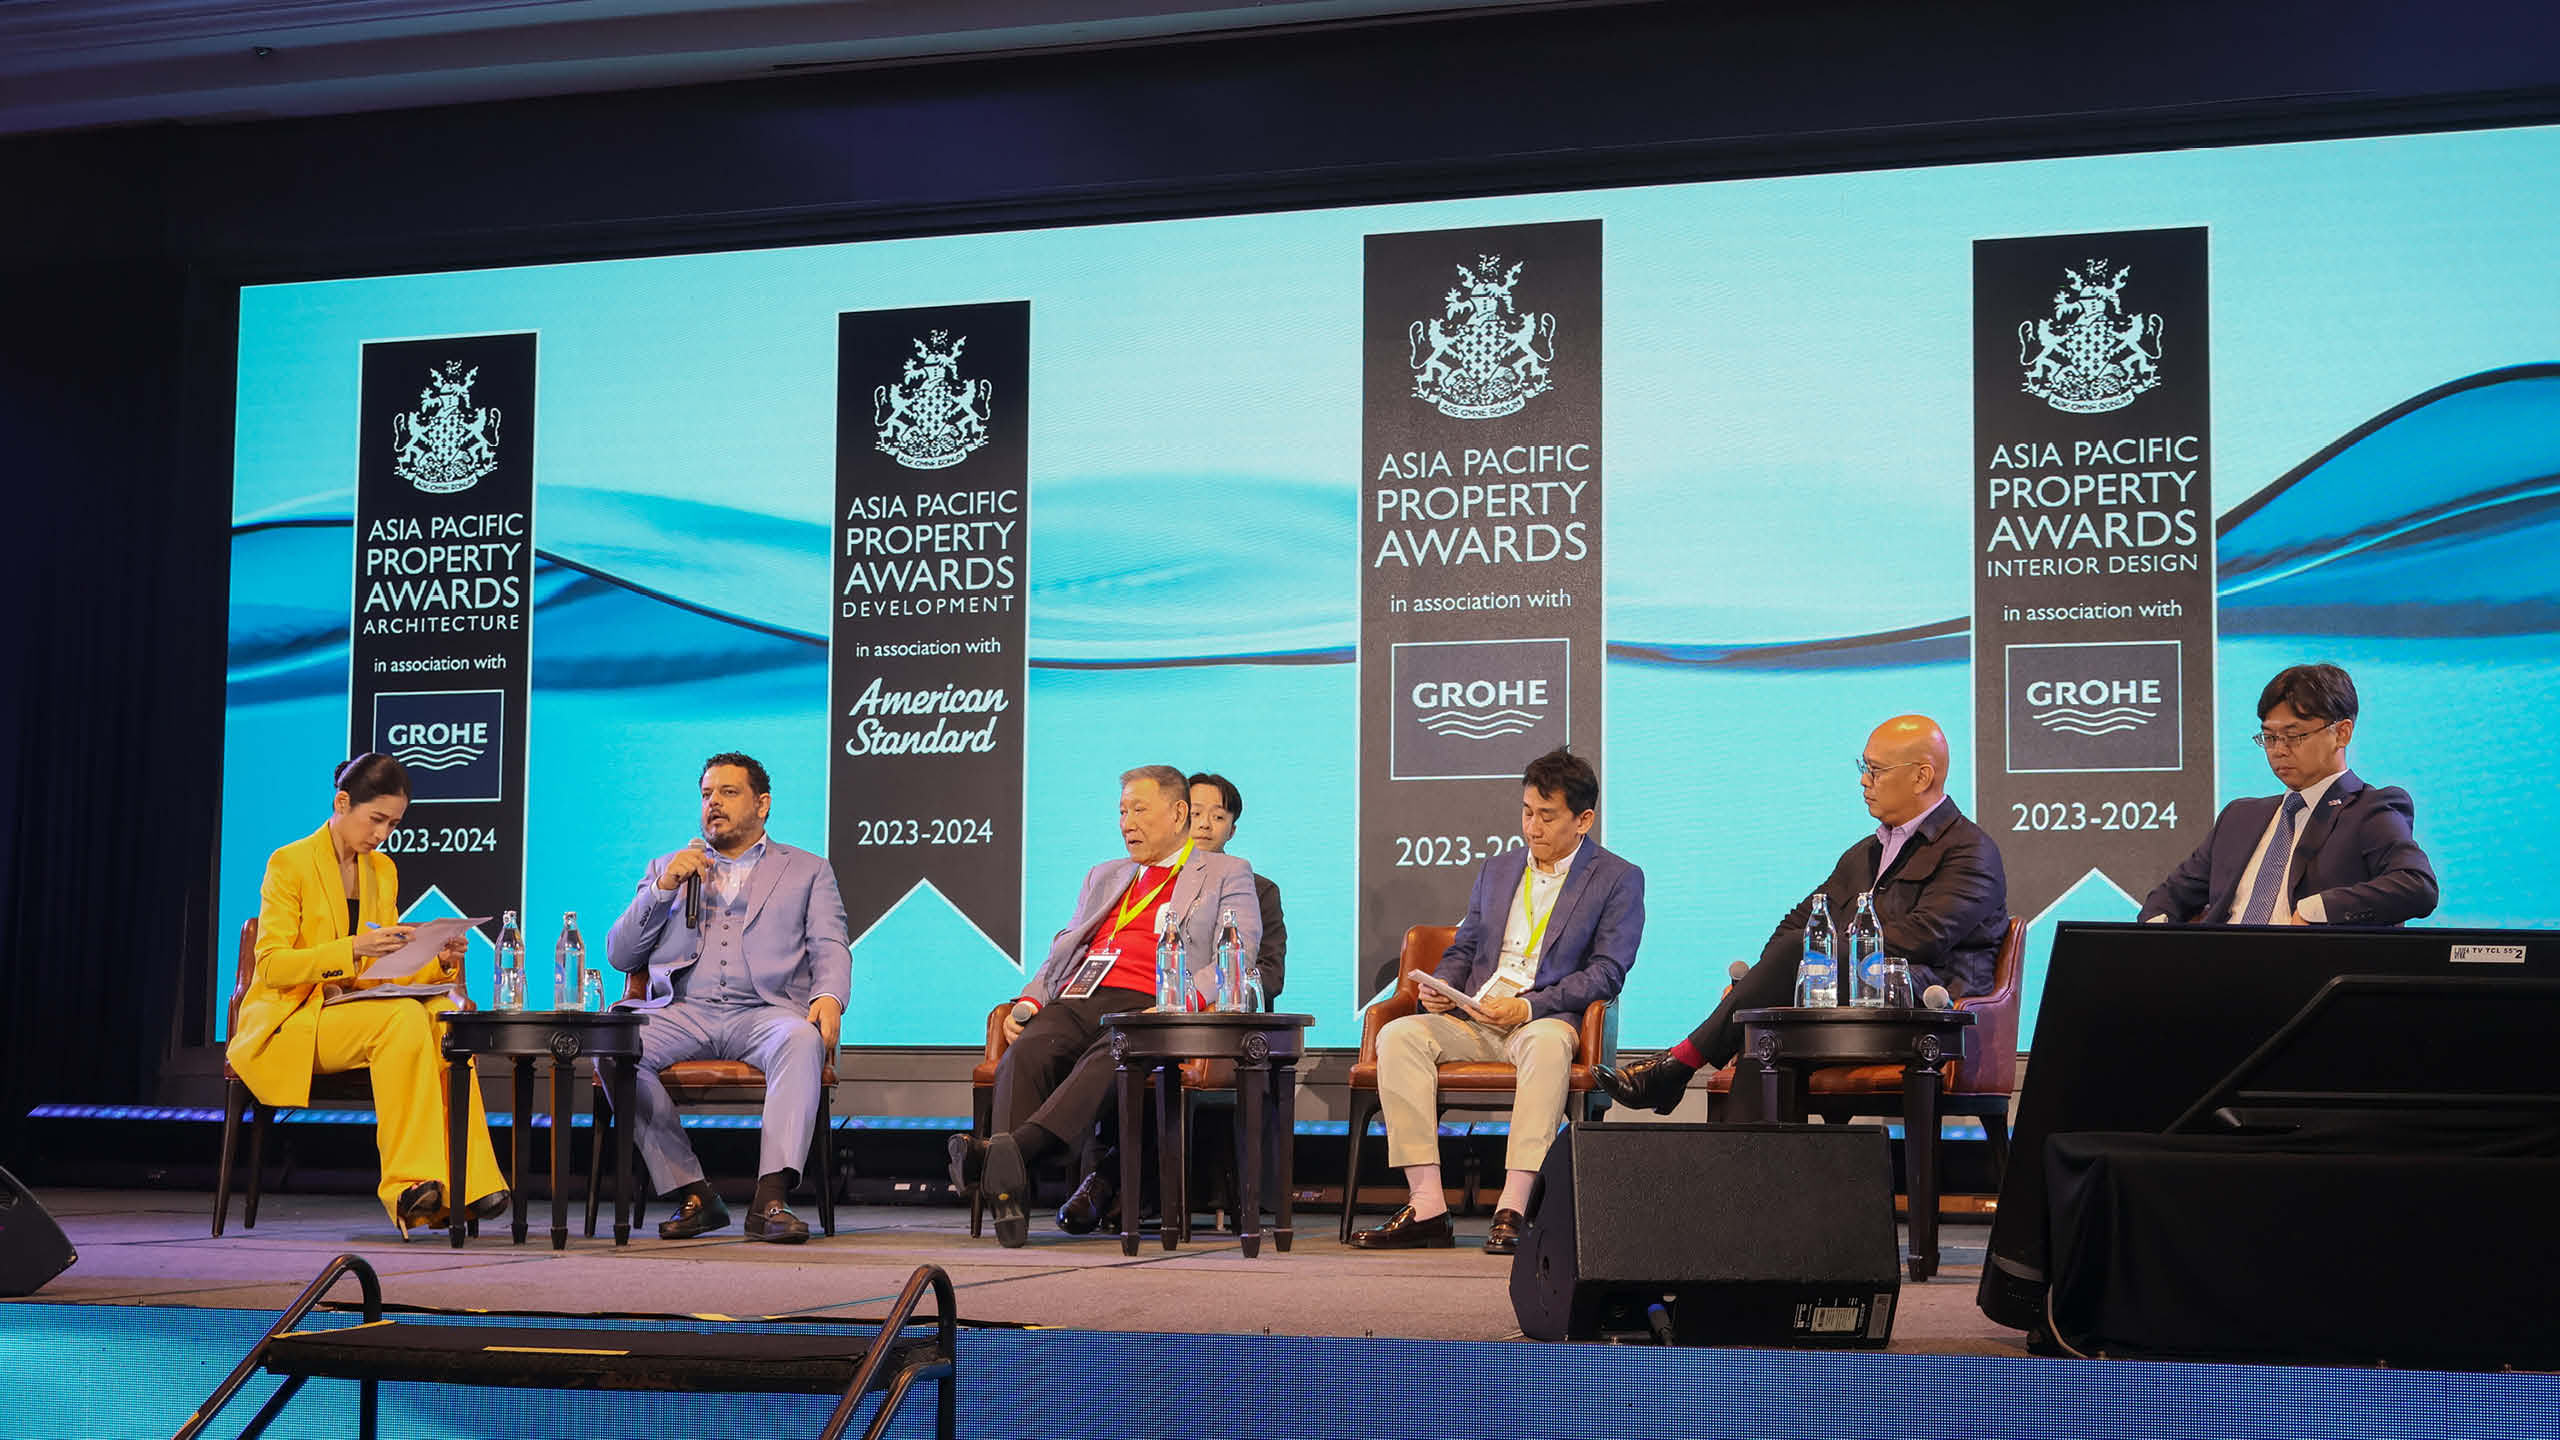 From left to right: Host: Patchari Raksawong; Saad Nazir, Chairman, Blue World City; Ching -Jing Sheen, Founder, Core pacific Developers; Dr. Singh Intrachooto, Chief Advisor to Research & innovation for sustainability Centre, Magnolia Developers Properties; Arch. Norman Agleron, Partner, HBA Manila
Satoshi Konagai